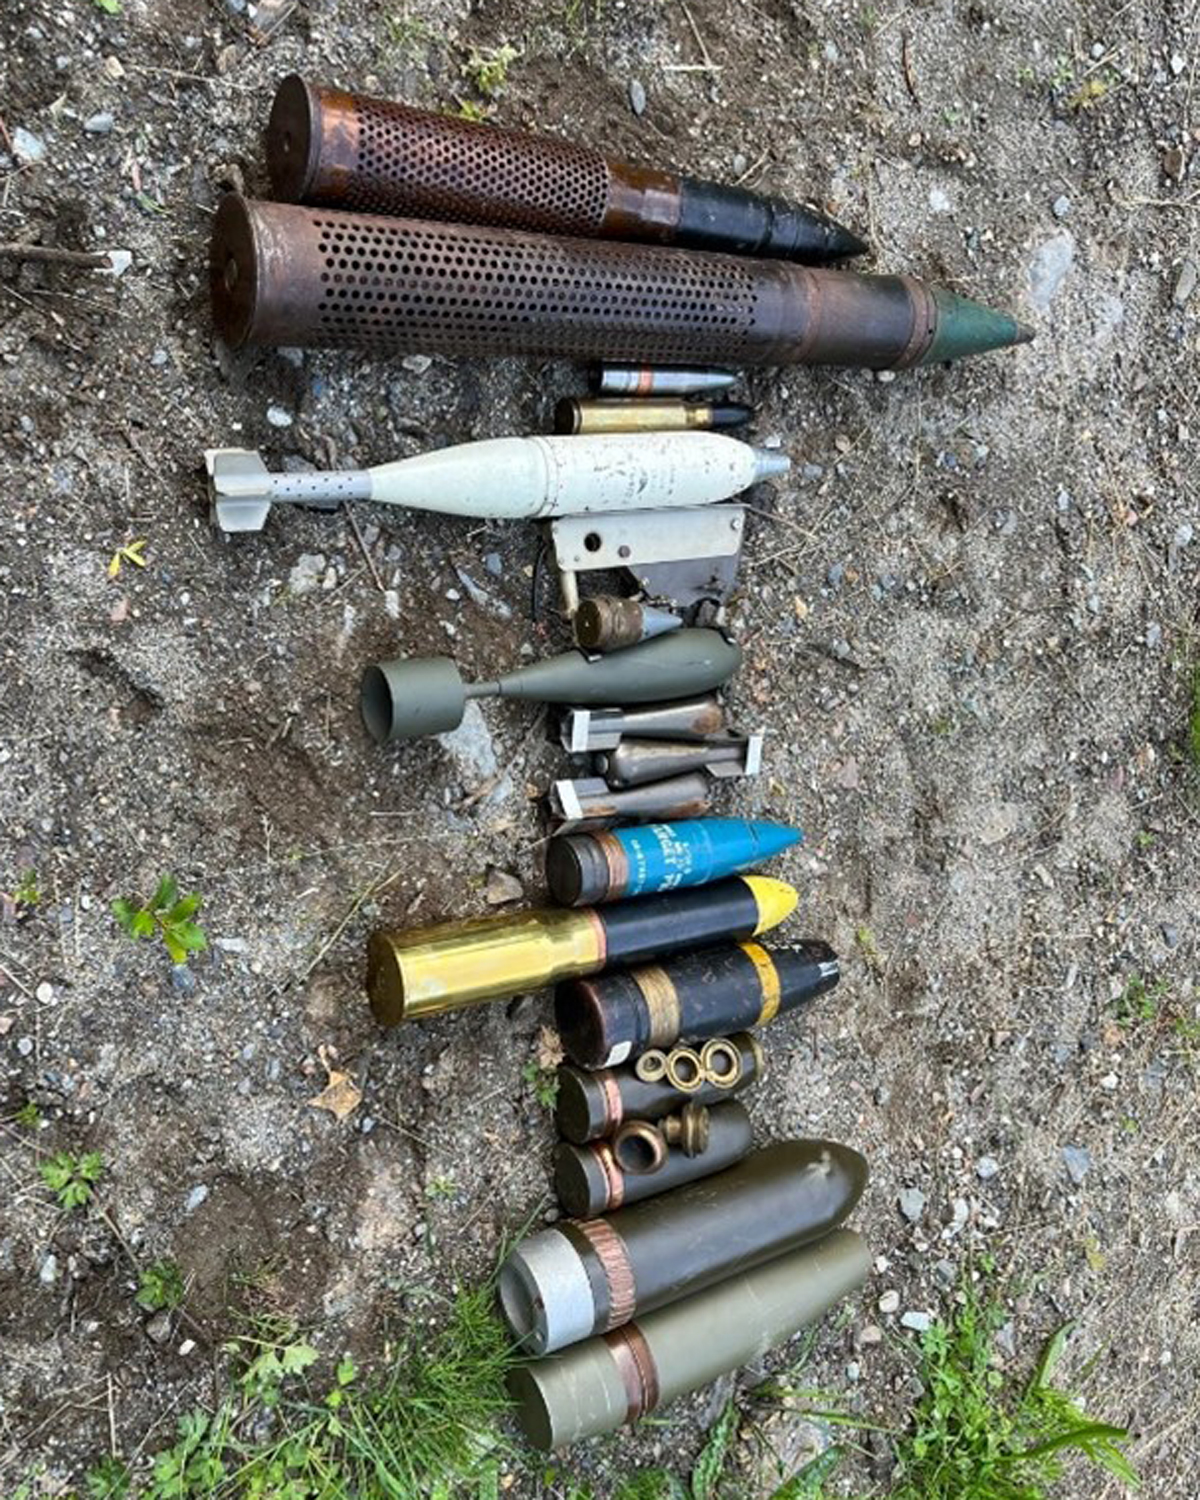 Some of the items the Explosive Ordnnce teams discovered while investigating a cache of munitions at a residential site in Mission, B.C. Photos supplied.
